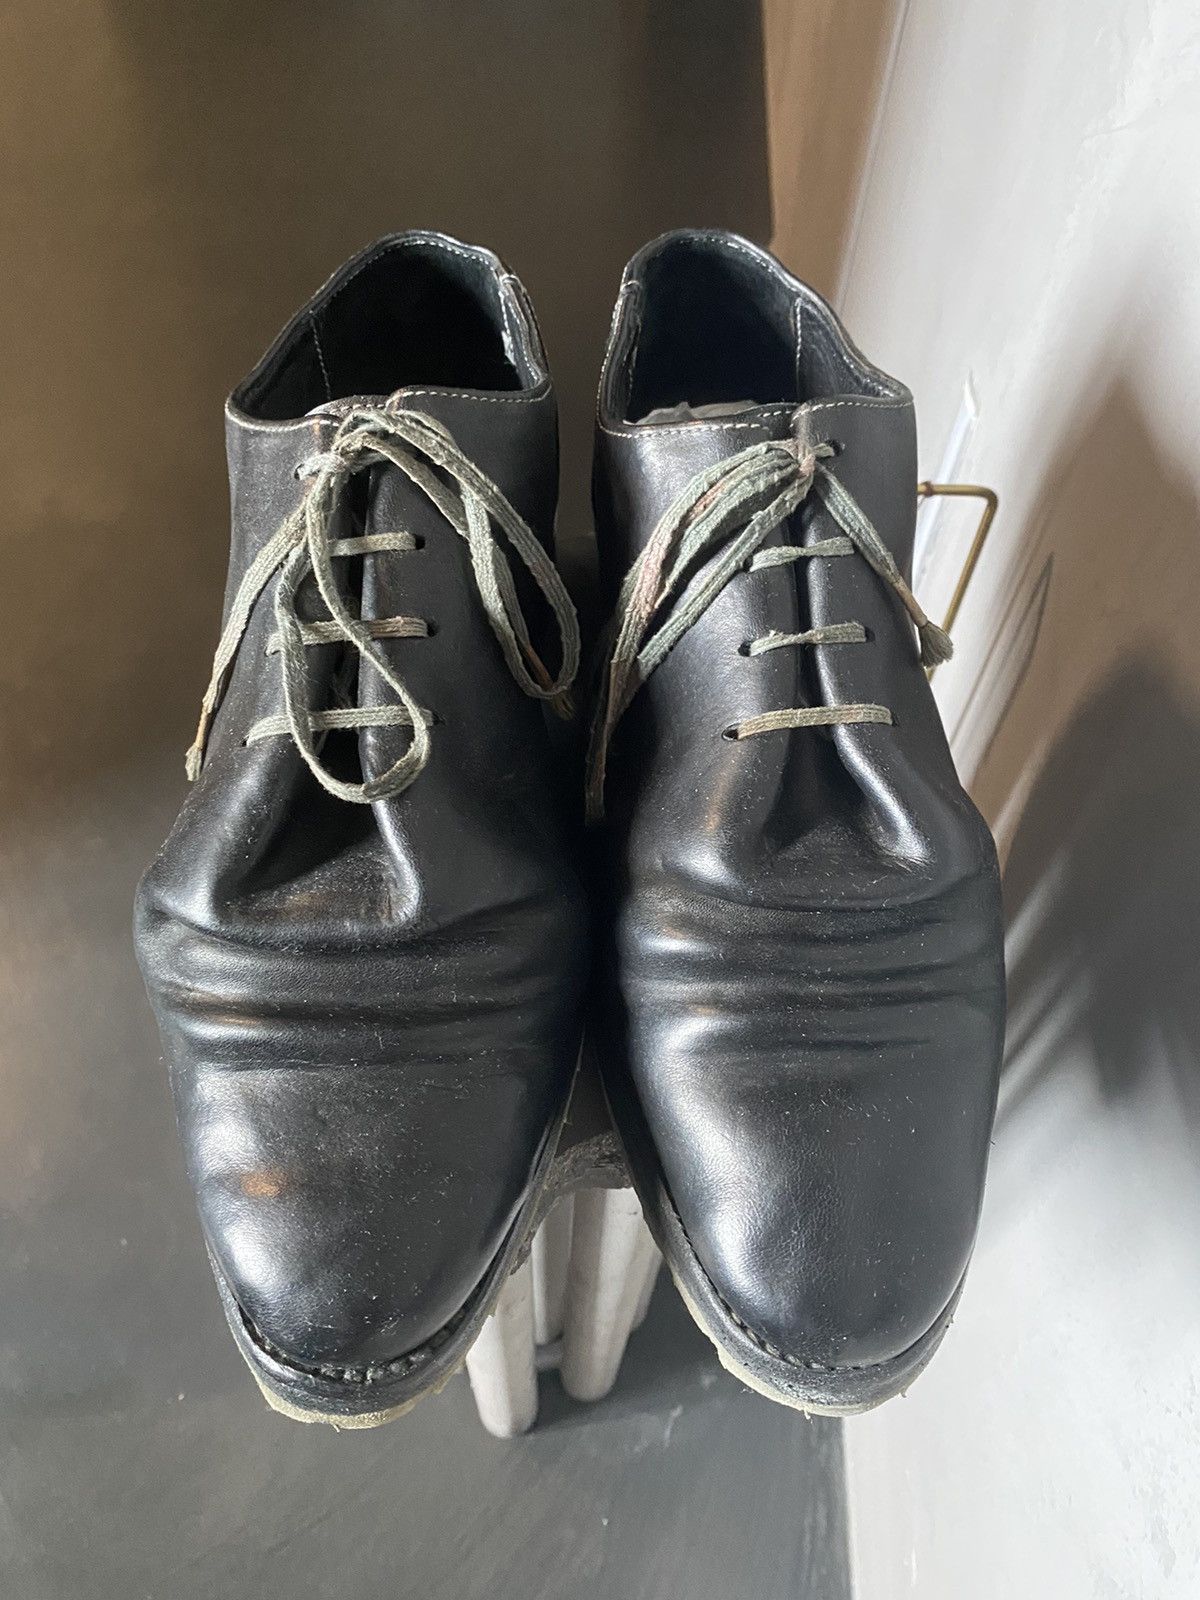 Carol Christian Poell Derby Shoes | Grailed